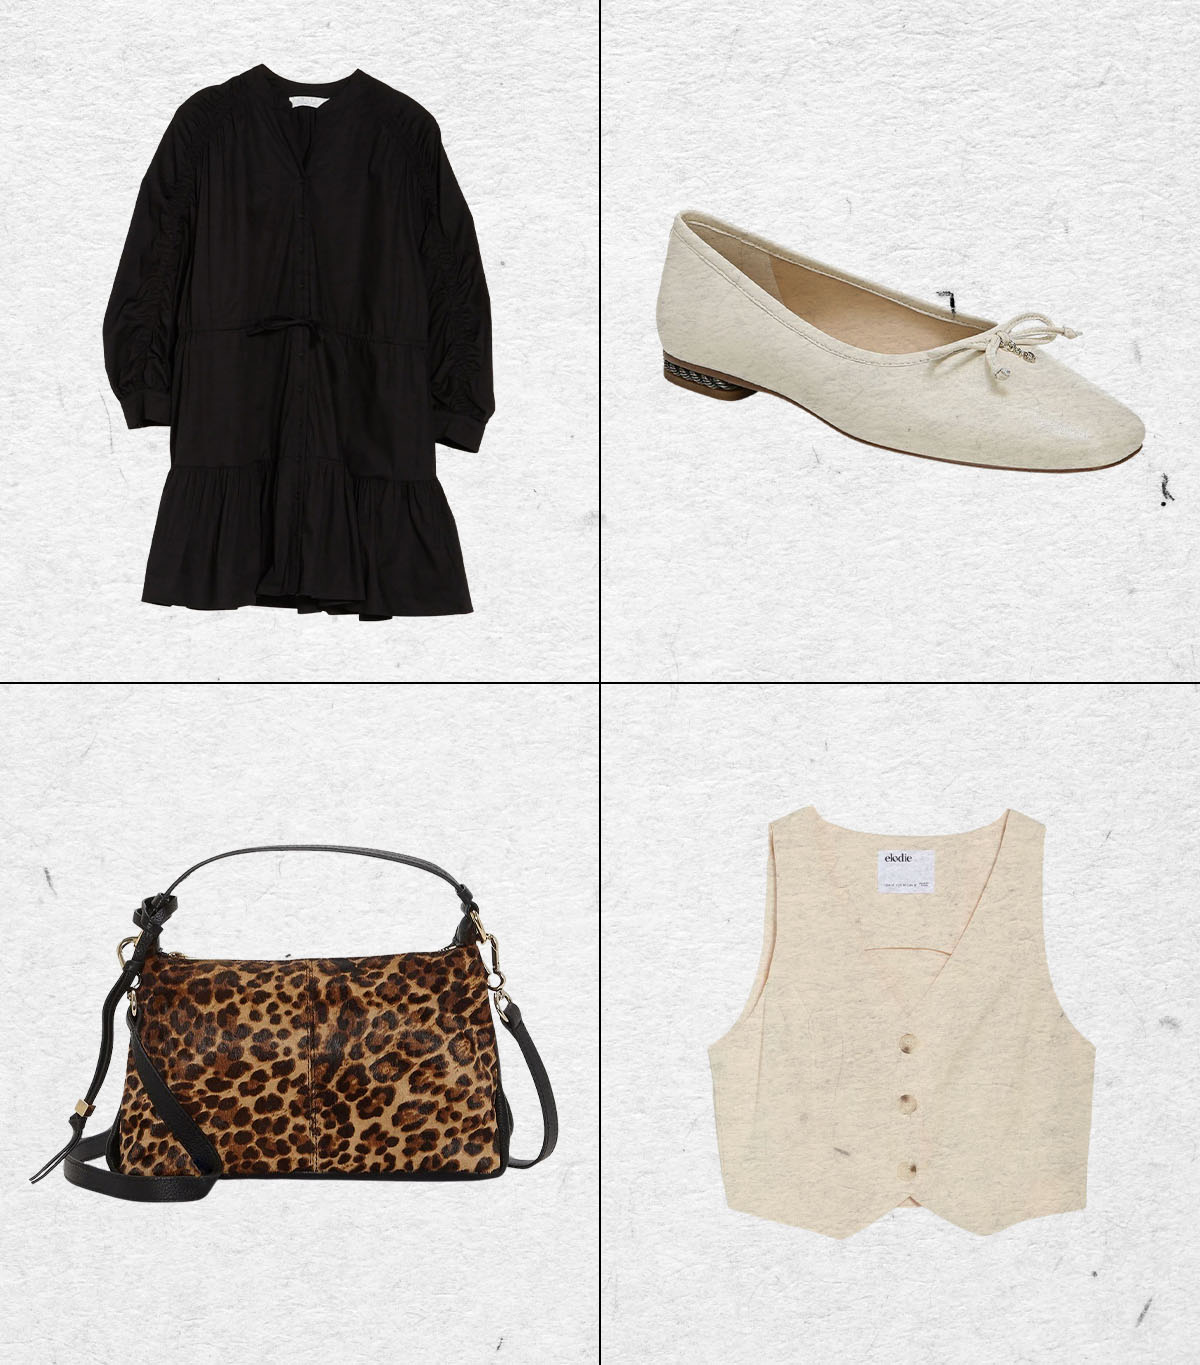 16 Under-$100 Nordstrom Rack Items for Fall